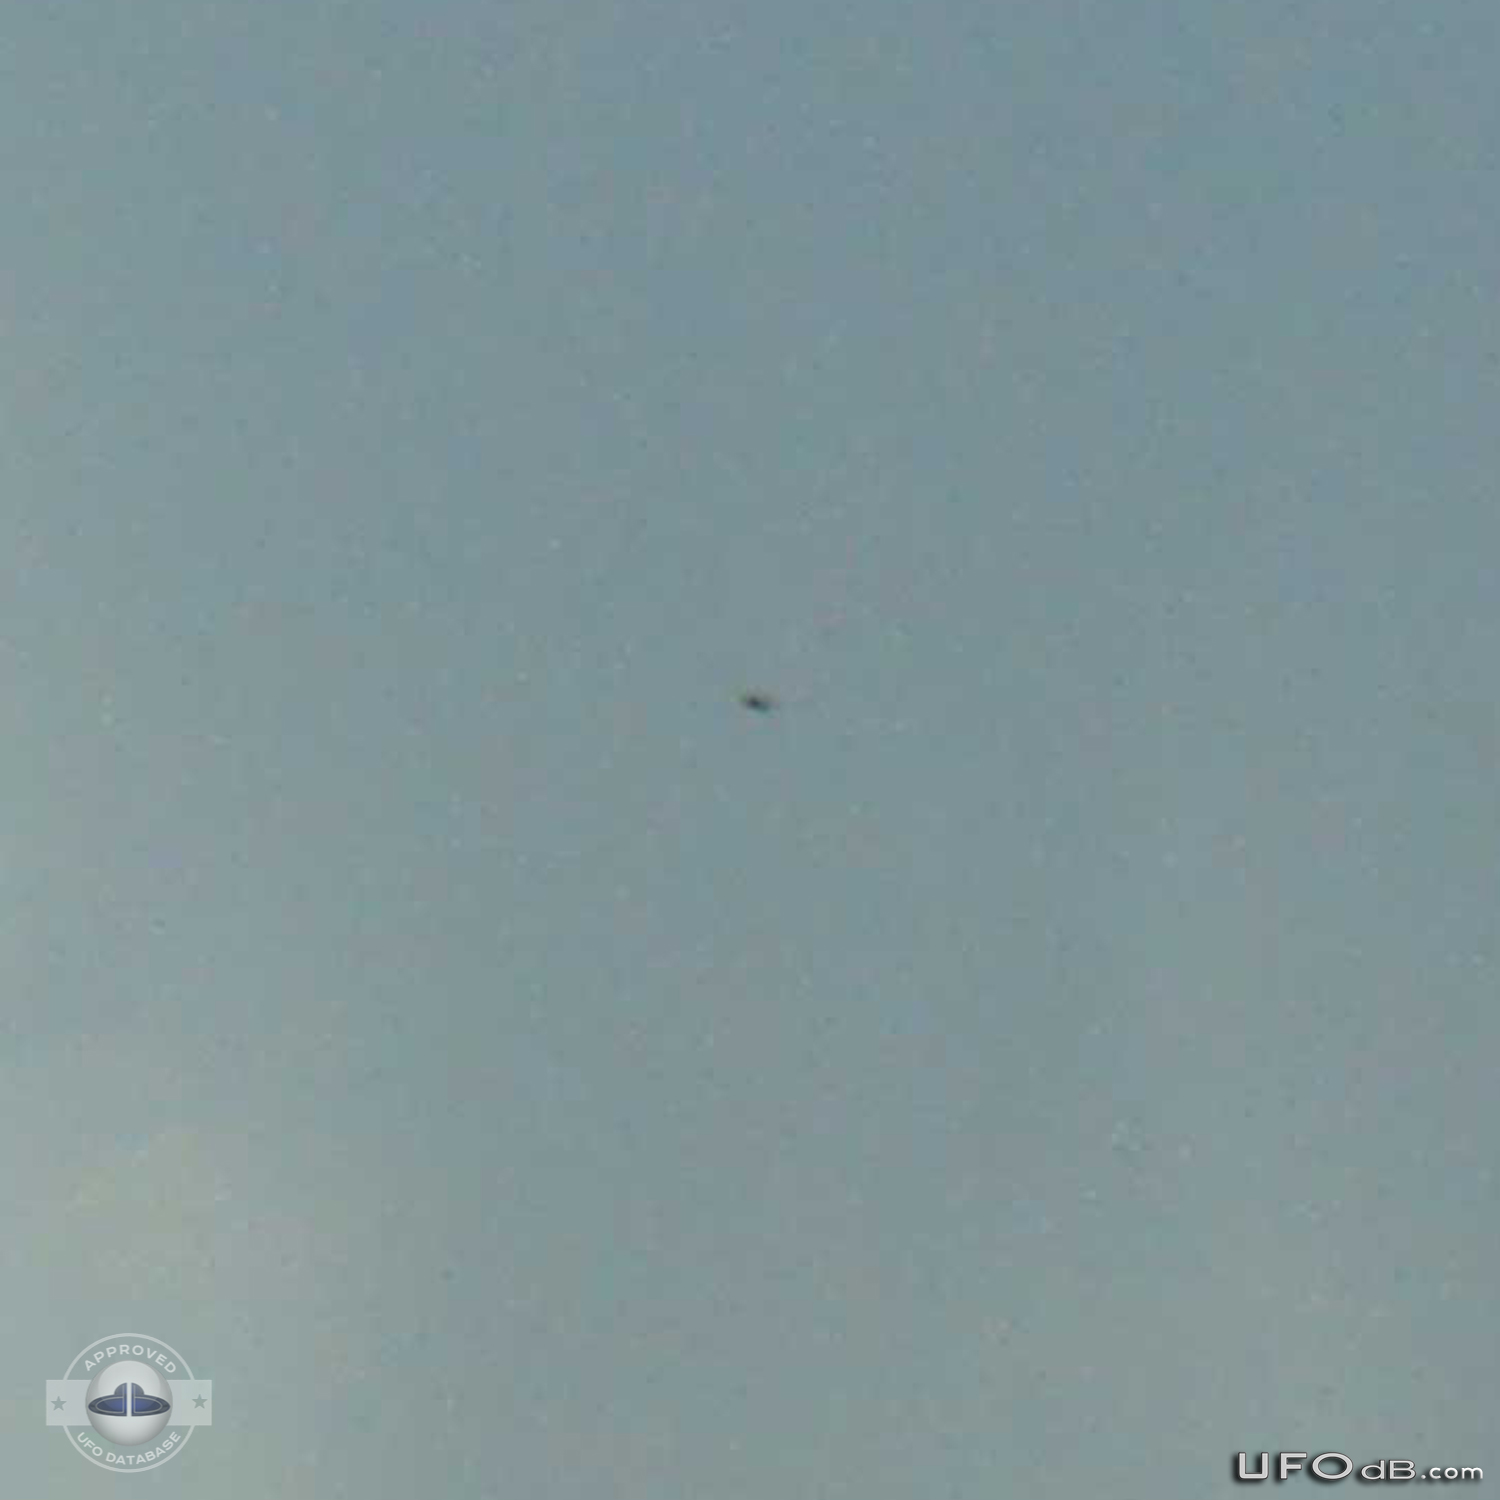 Thunderstorm pictures reveals an amazing saucer UFO in Kentucky | 2010 UFO Picture #394-2